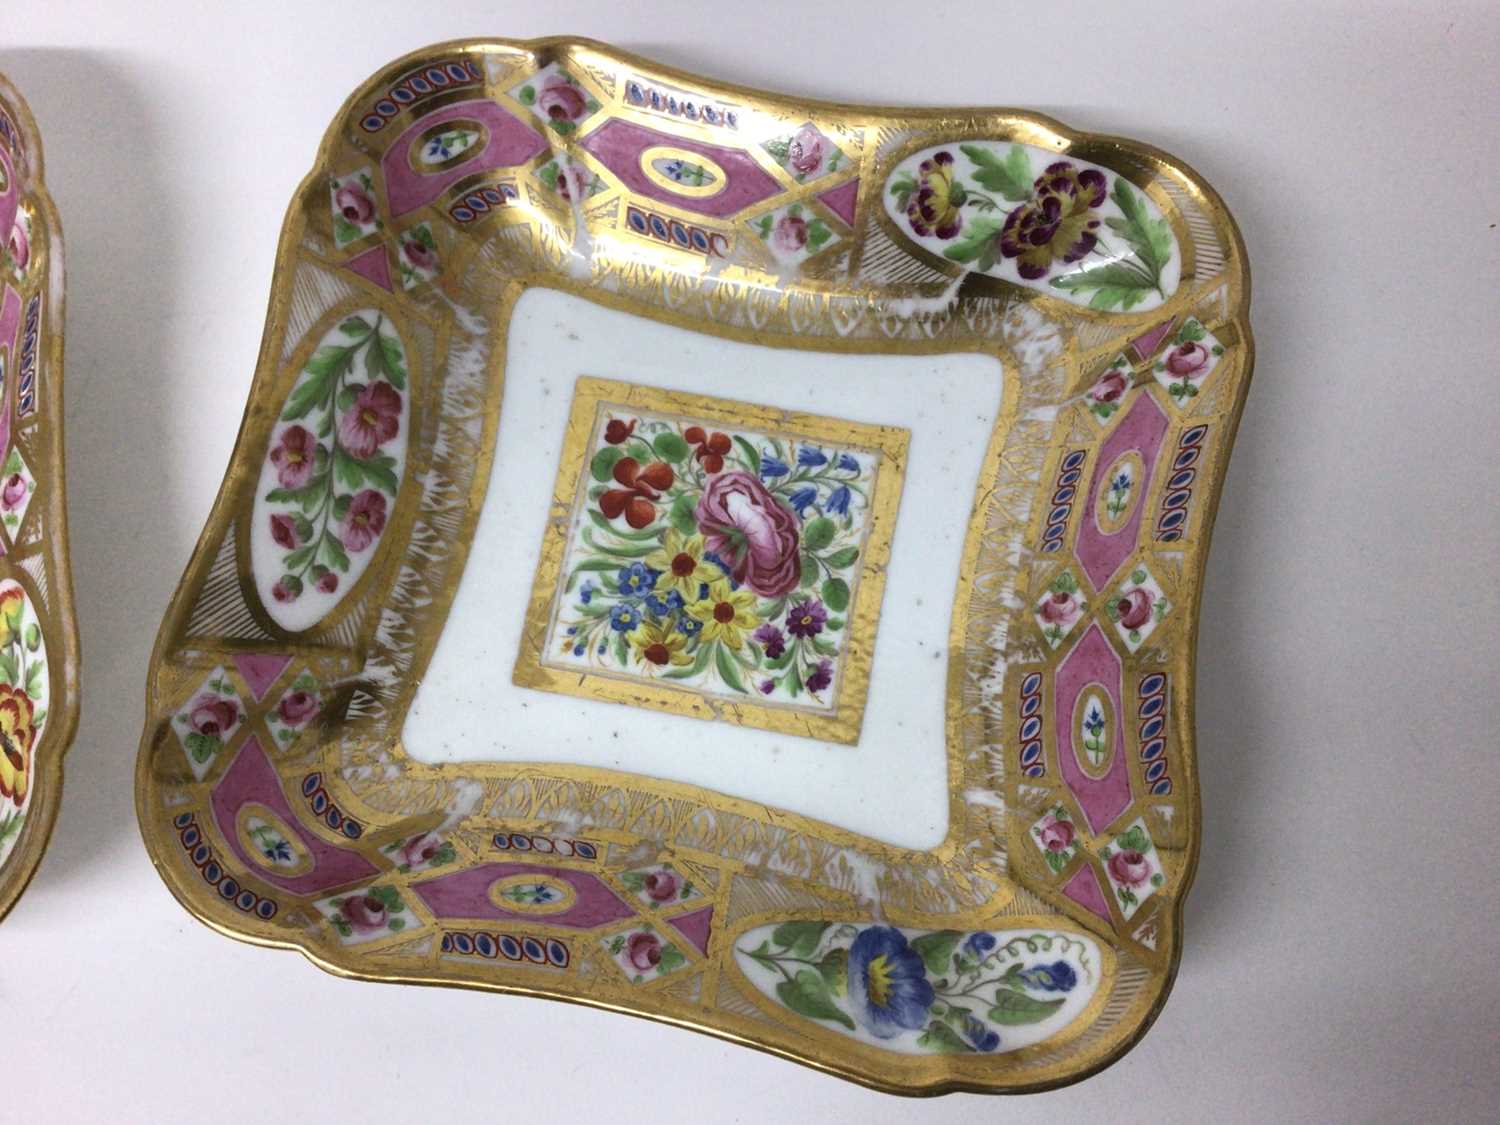 Pair of Sèvres shaped dishes, polychrome painted with floral sprays, on a pink and gilt ground - Image 2 of 6